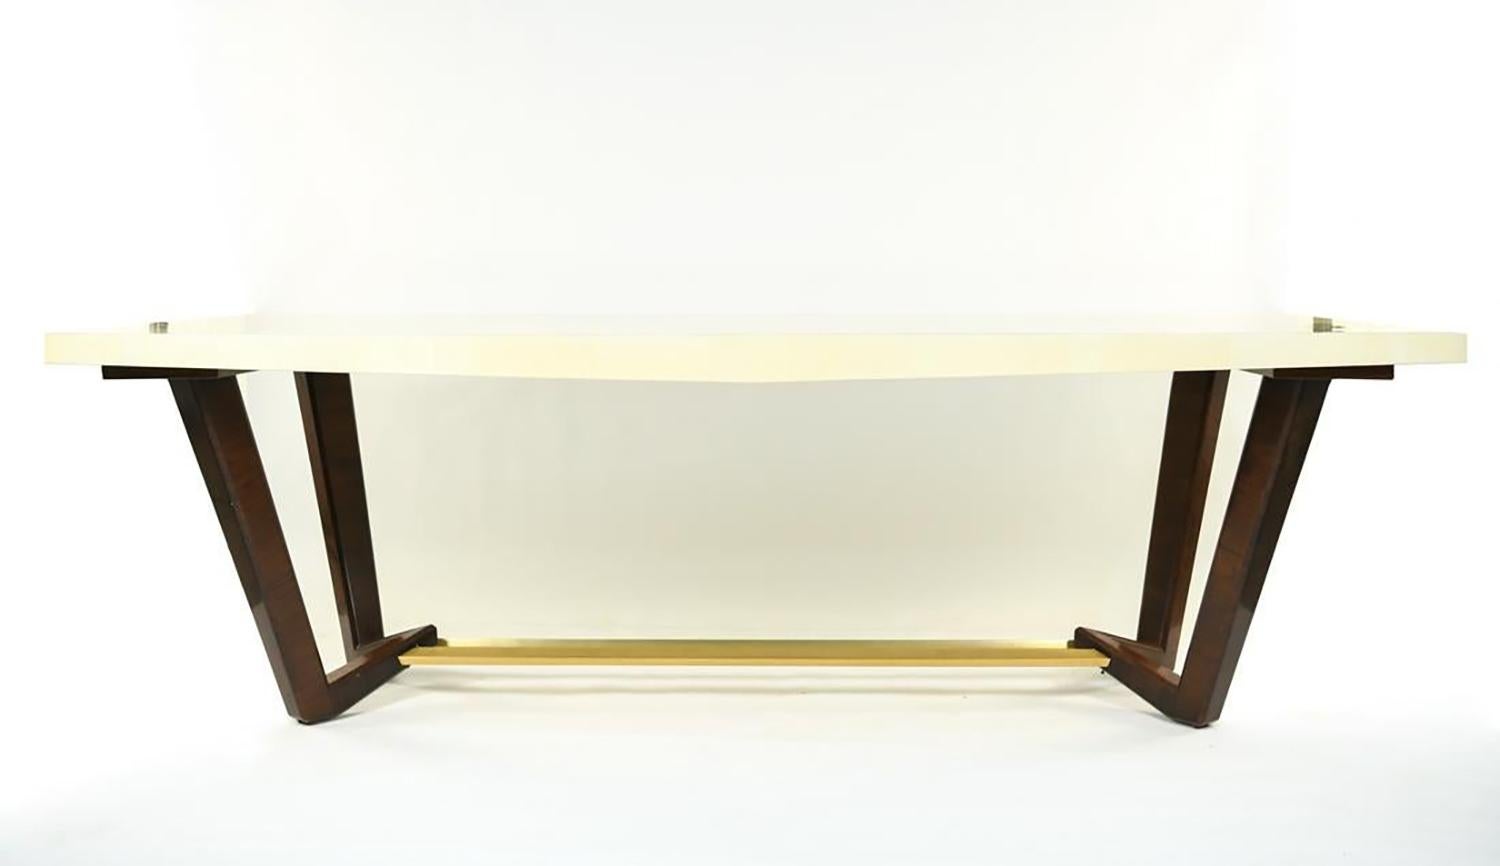 Art Deco Hollywood Regency Style Dining or Conference Table by Lorin Marsh Design